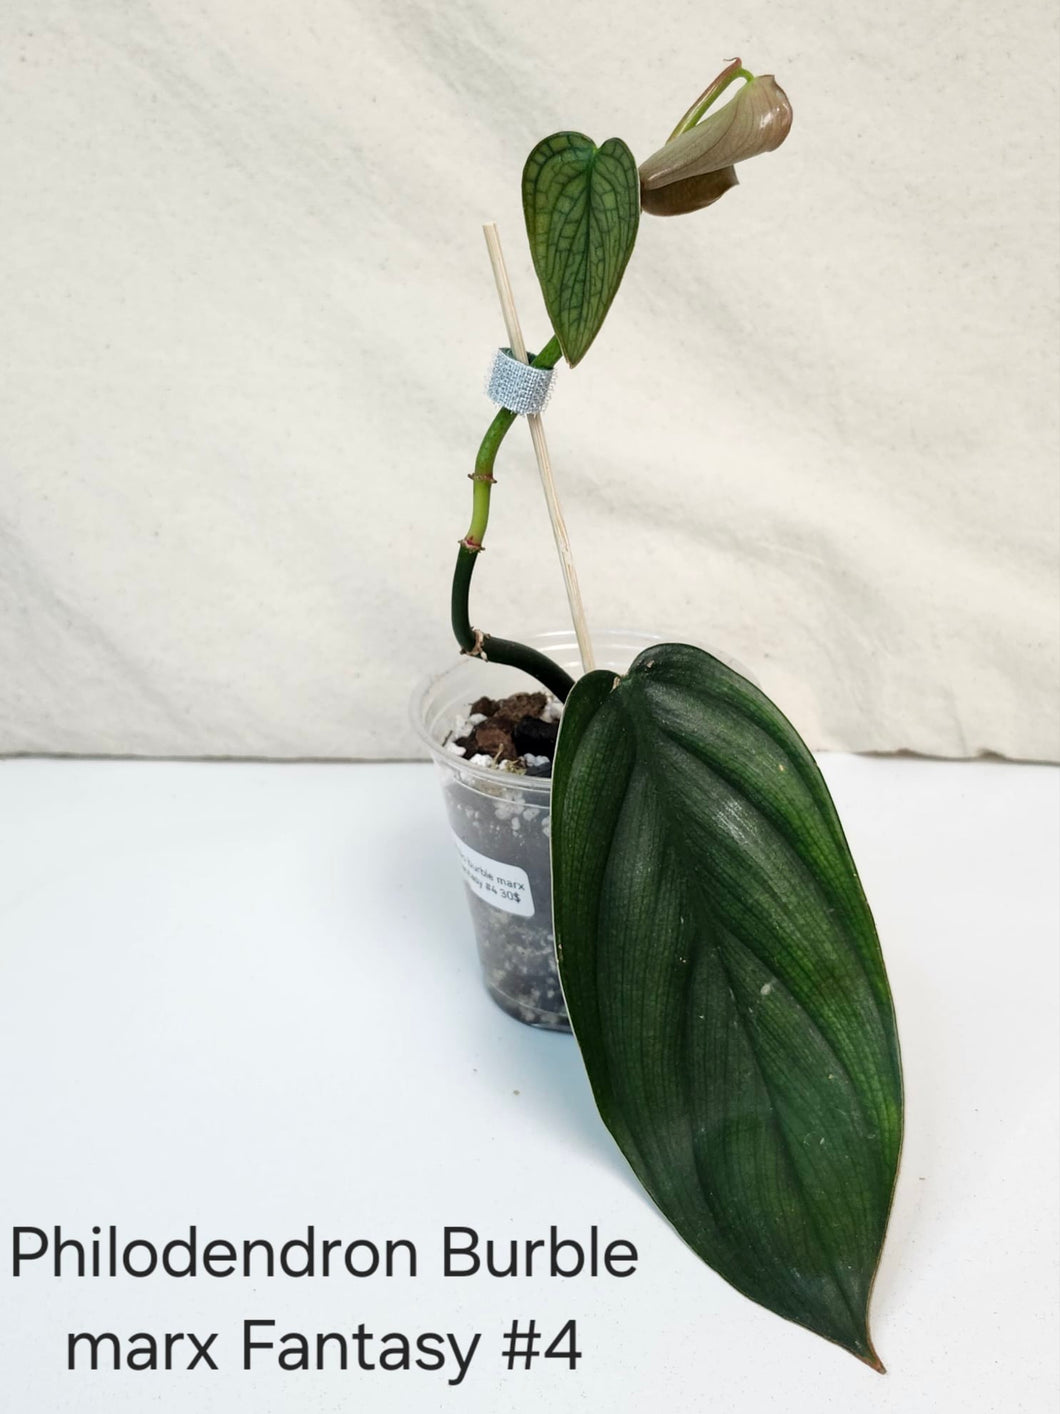 Philodendron burble marx fantasy #4